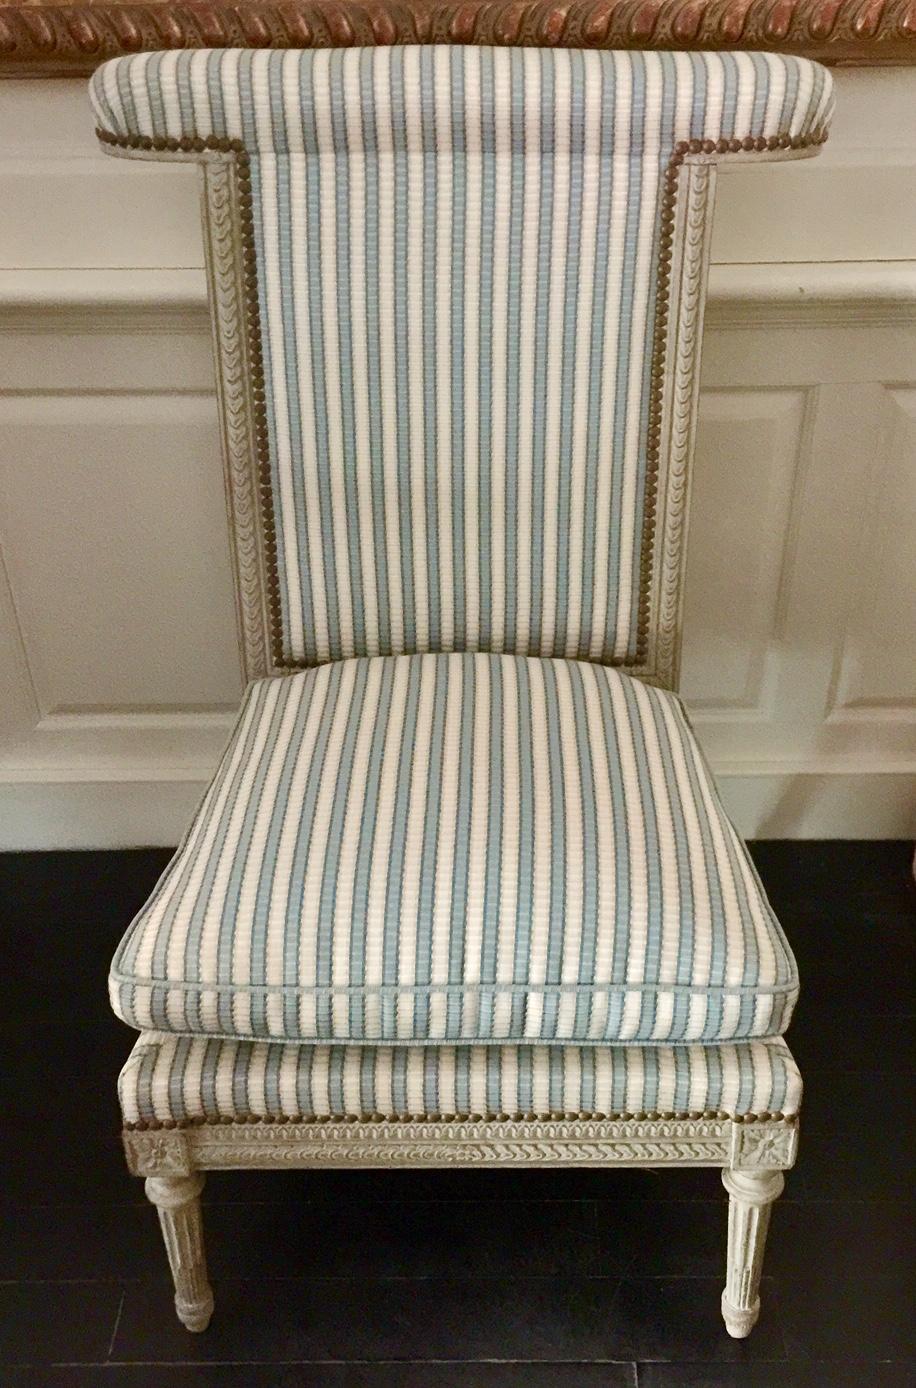 Rare and beautiful French Louis XVI style Voyelle (or Ponteuse) chair, 19th century, from a private collection of the French Riviera.
These chairs were used by gentlemen to sit astride and watch others playing cards and a variety of parlour games,